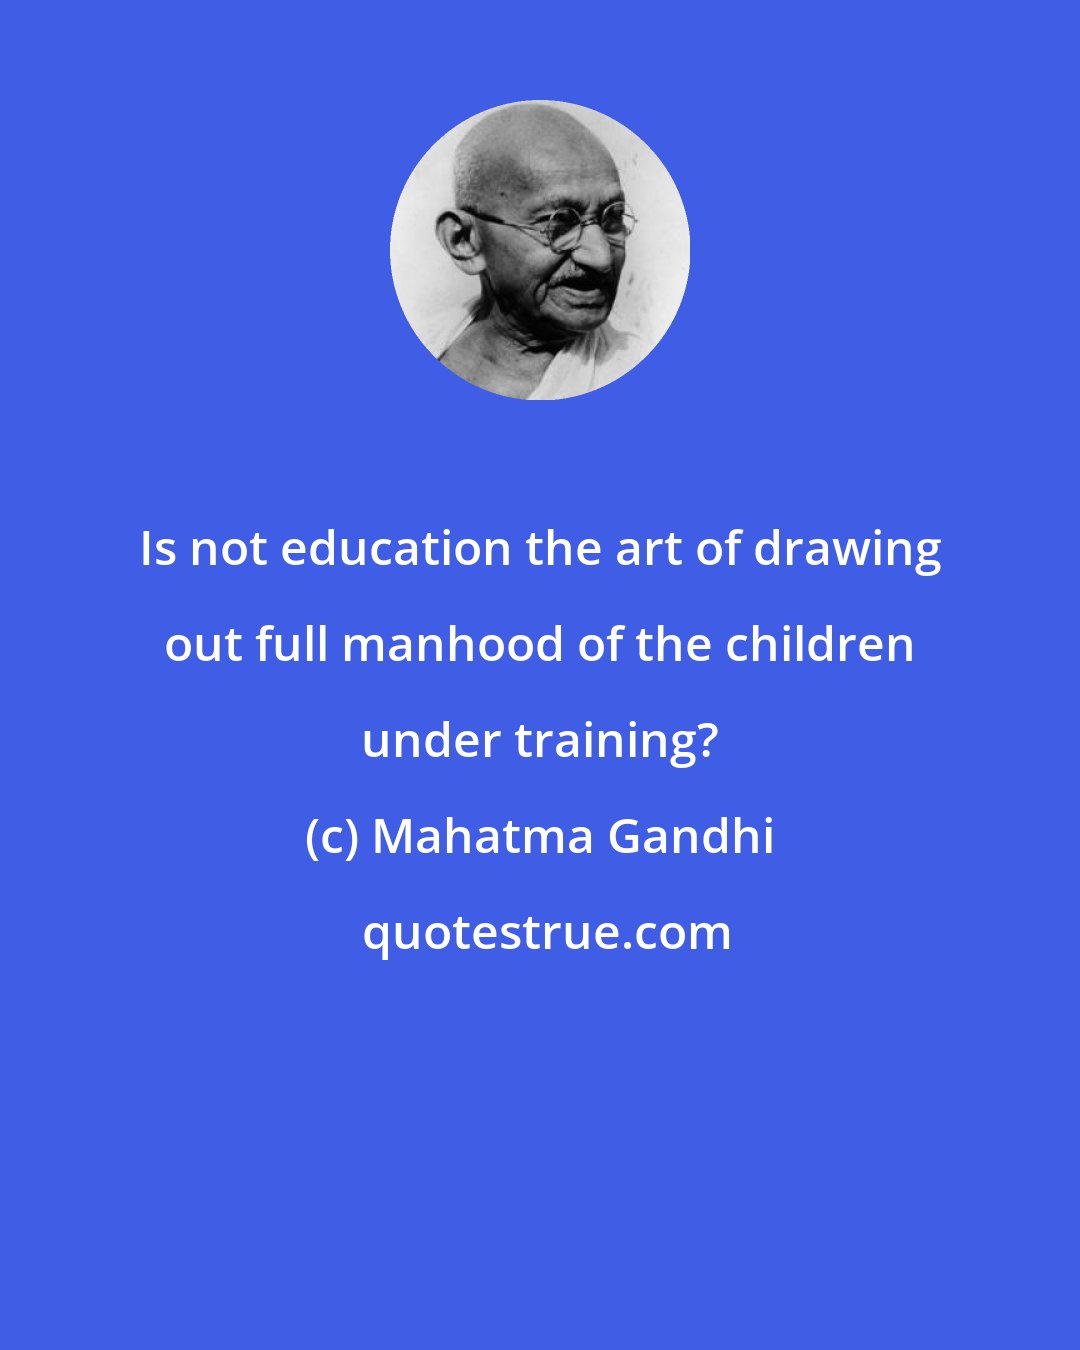 Mahatma Gandhi: Is not education the art of drawing out full manhood of the children under training?